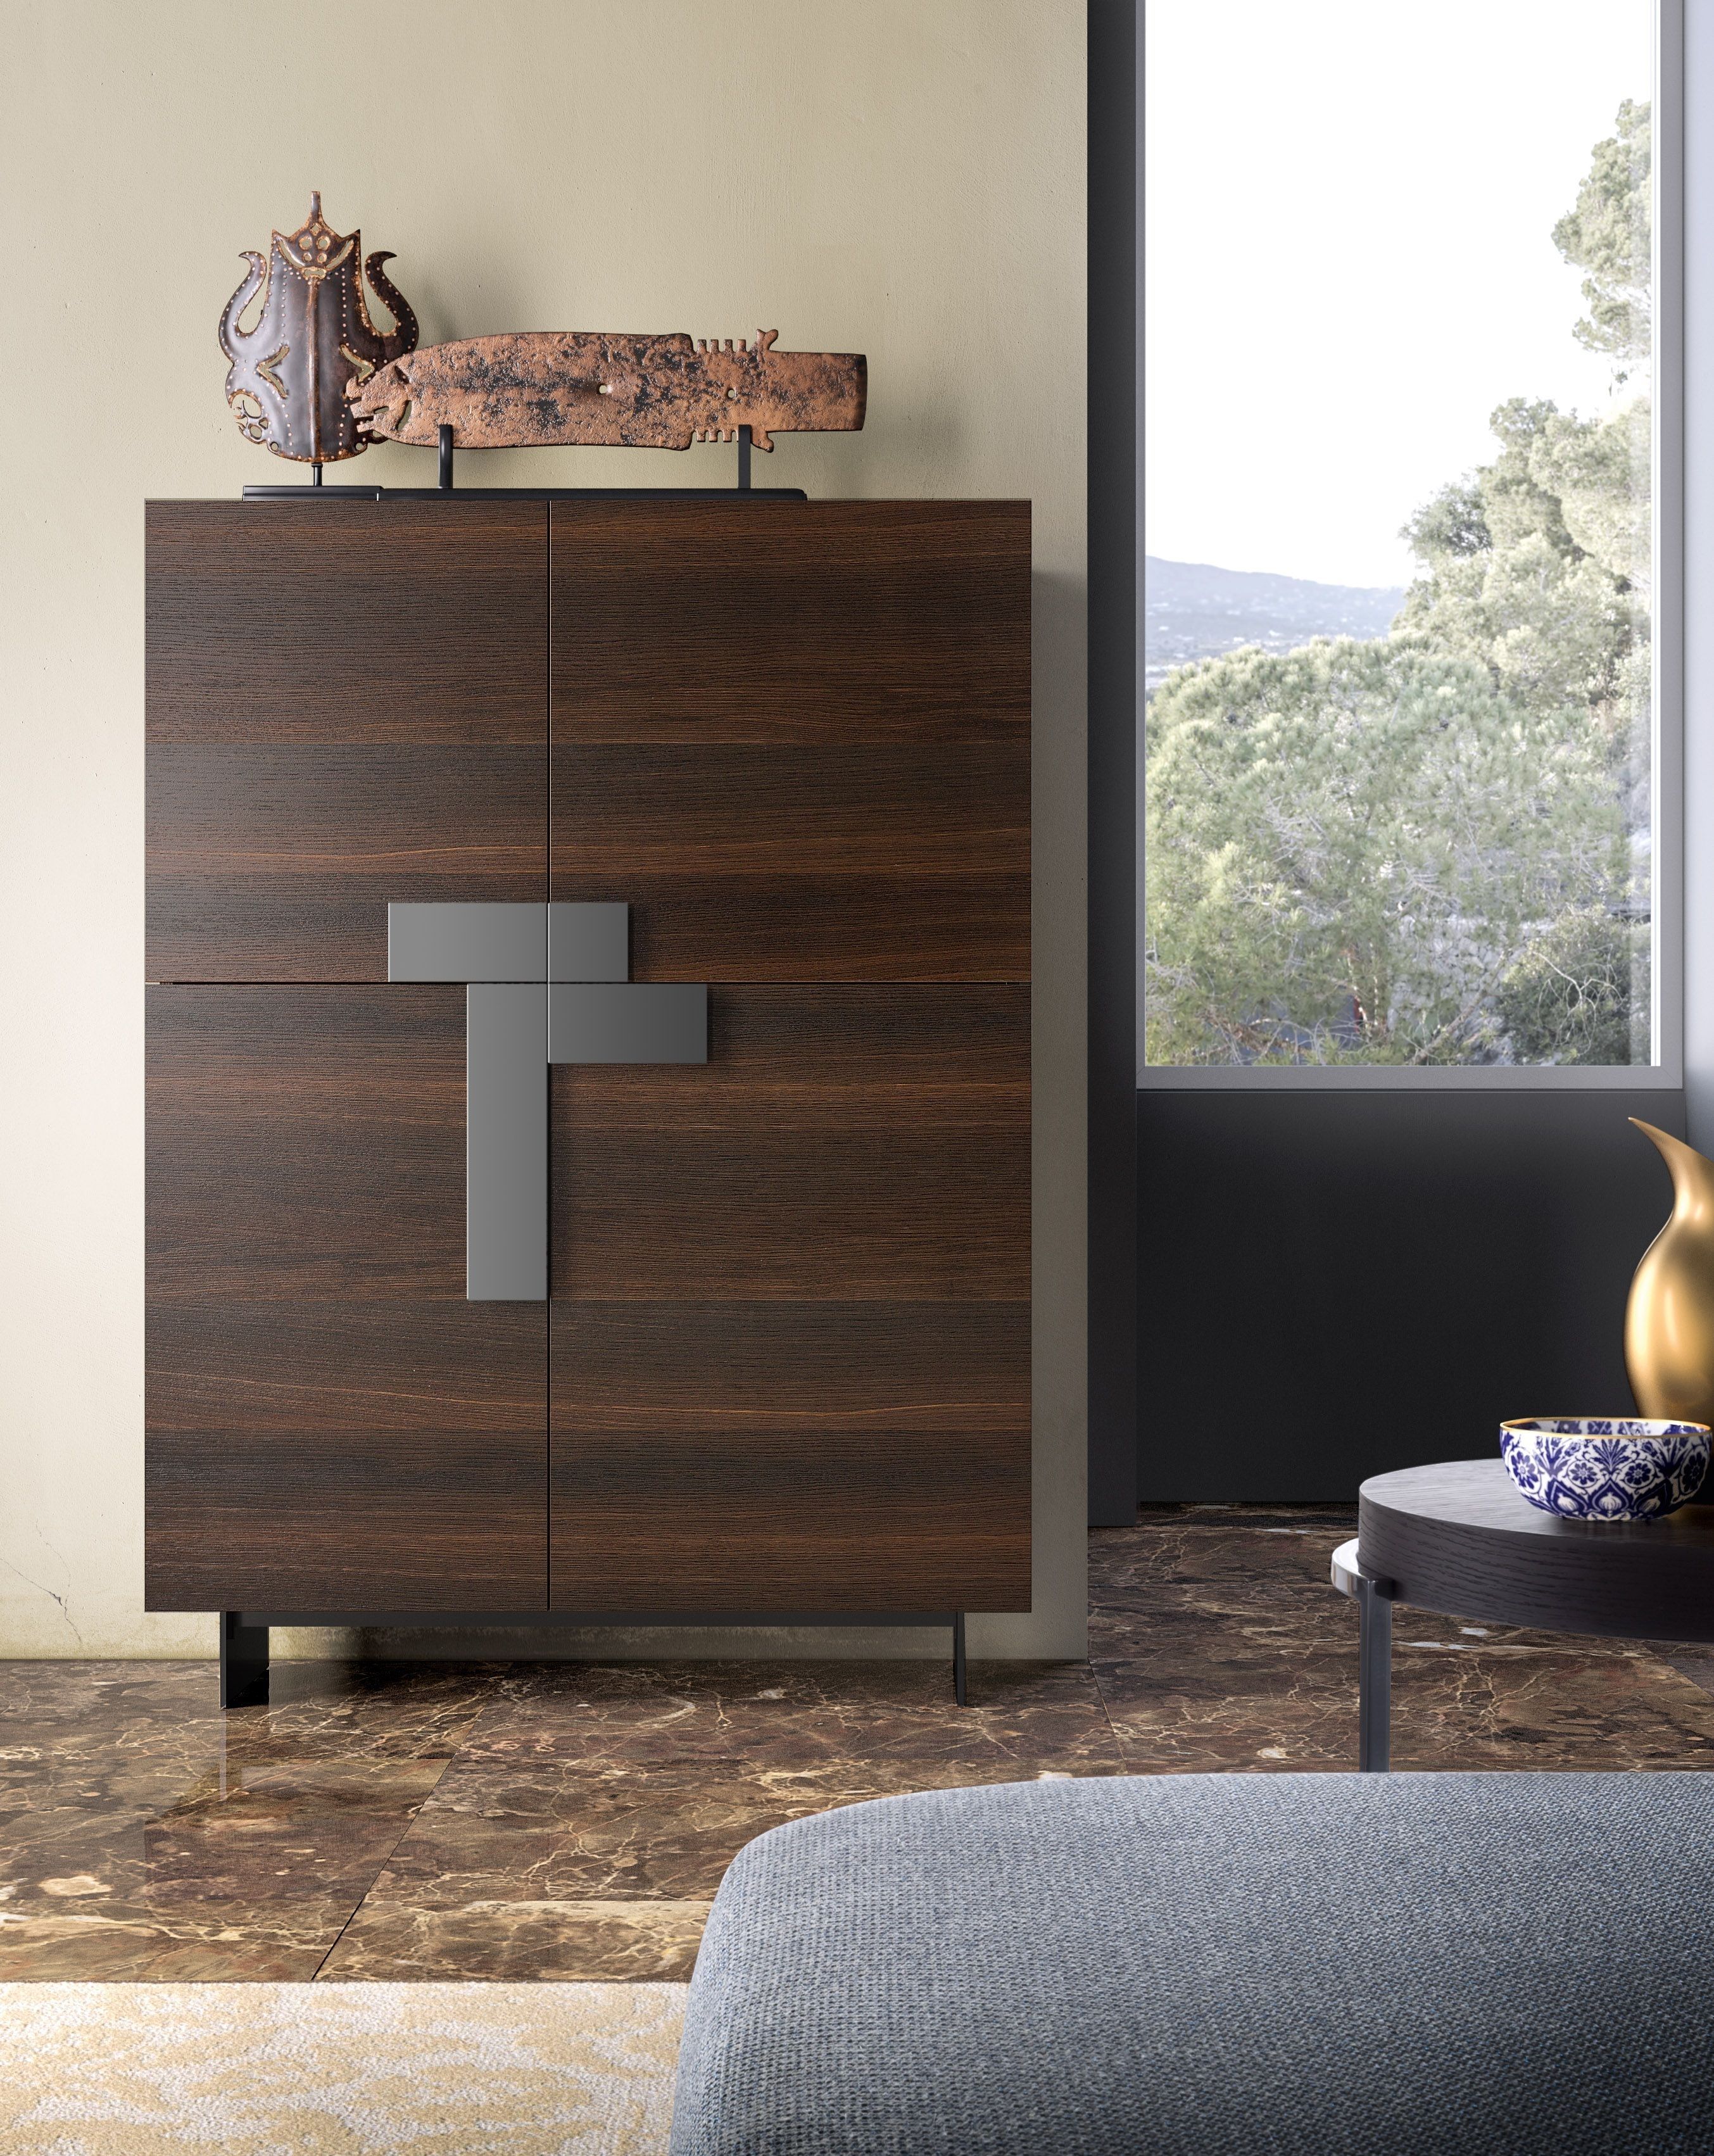 Ginevra Sideboard With Burnt Oak Structure And Fronts, Titanium Regarding Latest Burnt Oak Wood Sideboards (View 3 of 20)